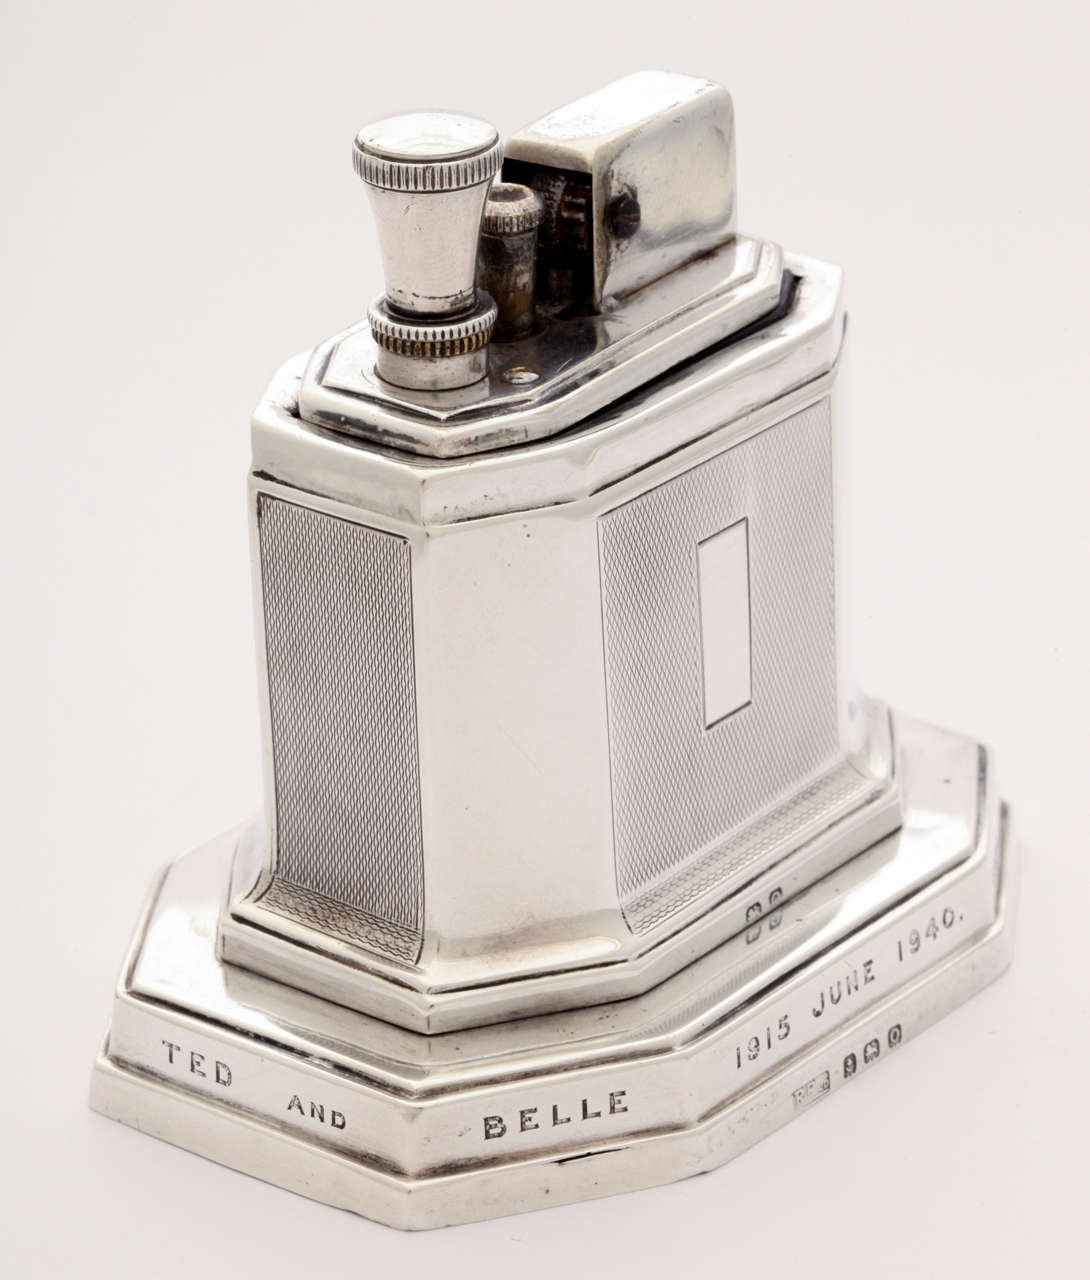 Amazing and very rare Ronson 'Touch Tip' model table lighter that unlike the vast majority was bodied in England. The body is all sterling silver, and bares the hallmarks for Ronson, being made in Birmingham, 1938.

The lighter is in very good